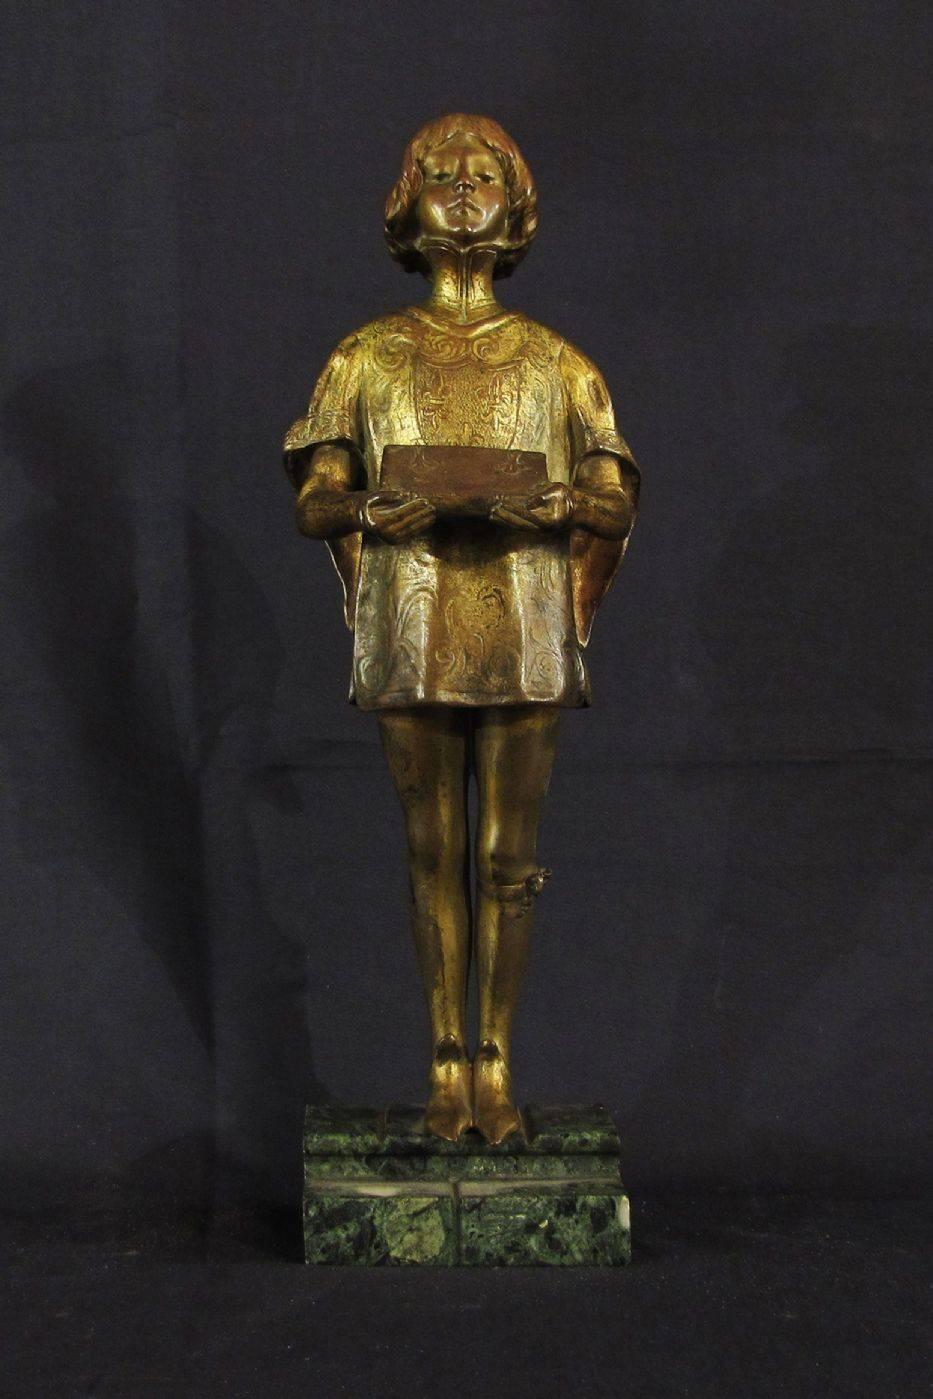 Ferdinand Marie Leon Delagrange (Orleans, 1872-Croix d'Hins, 1910)
'The Page'
Gilded bronze sculpture, lost wax casting
Base in green marble
Signature of the sculpture and stamp on the back
France, first years of the 20th century.